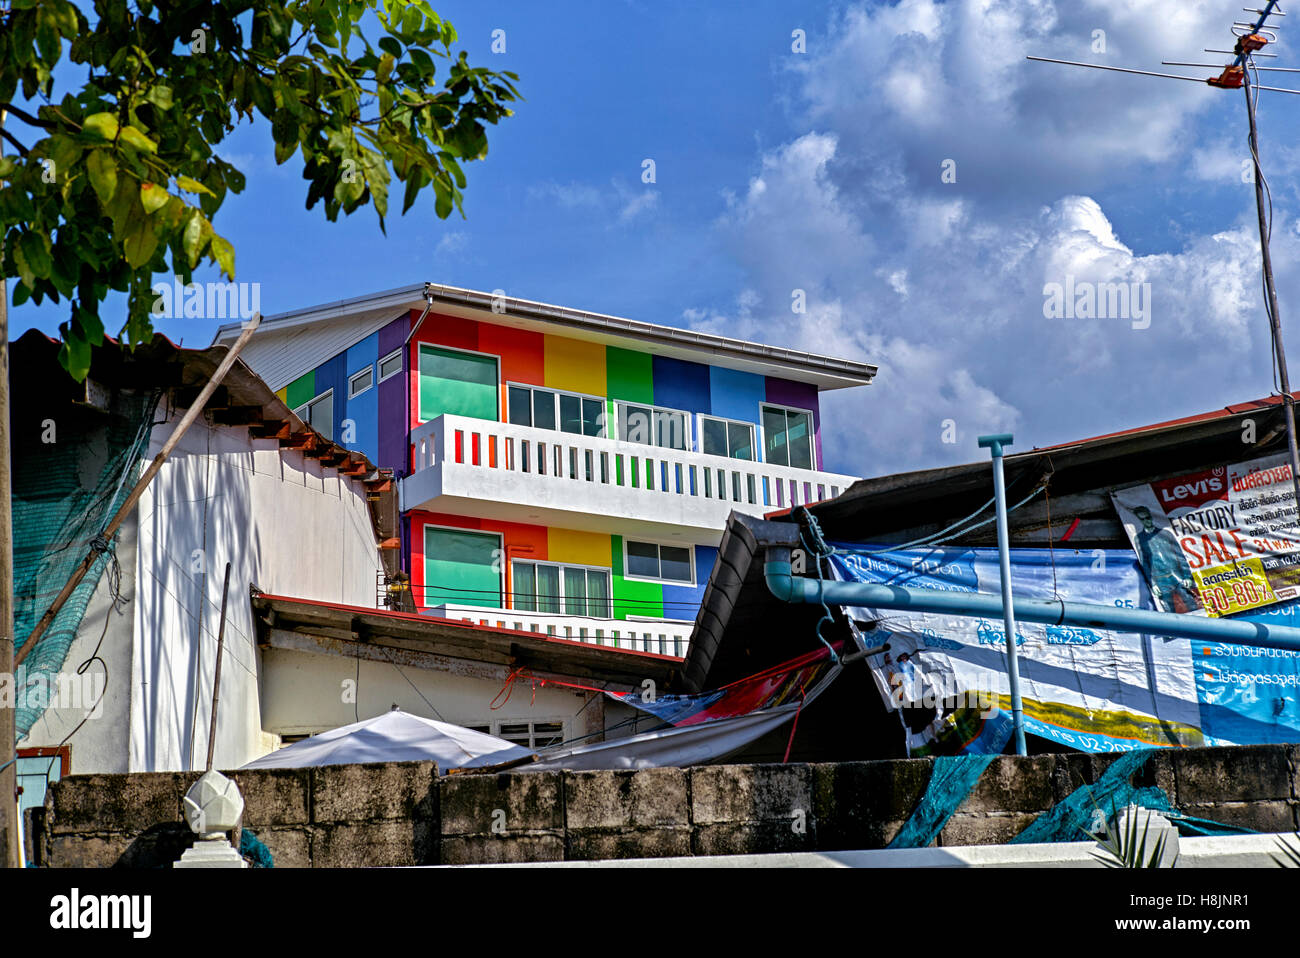 Multi-colored painted building in a run down environment providing the concept of new versus old. Thailand S. E. Asia Stock Photo